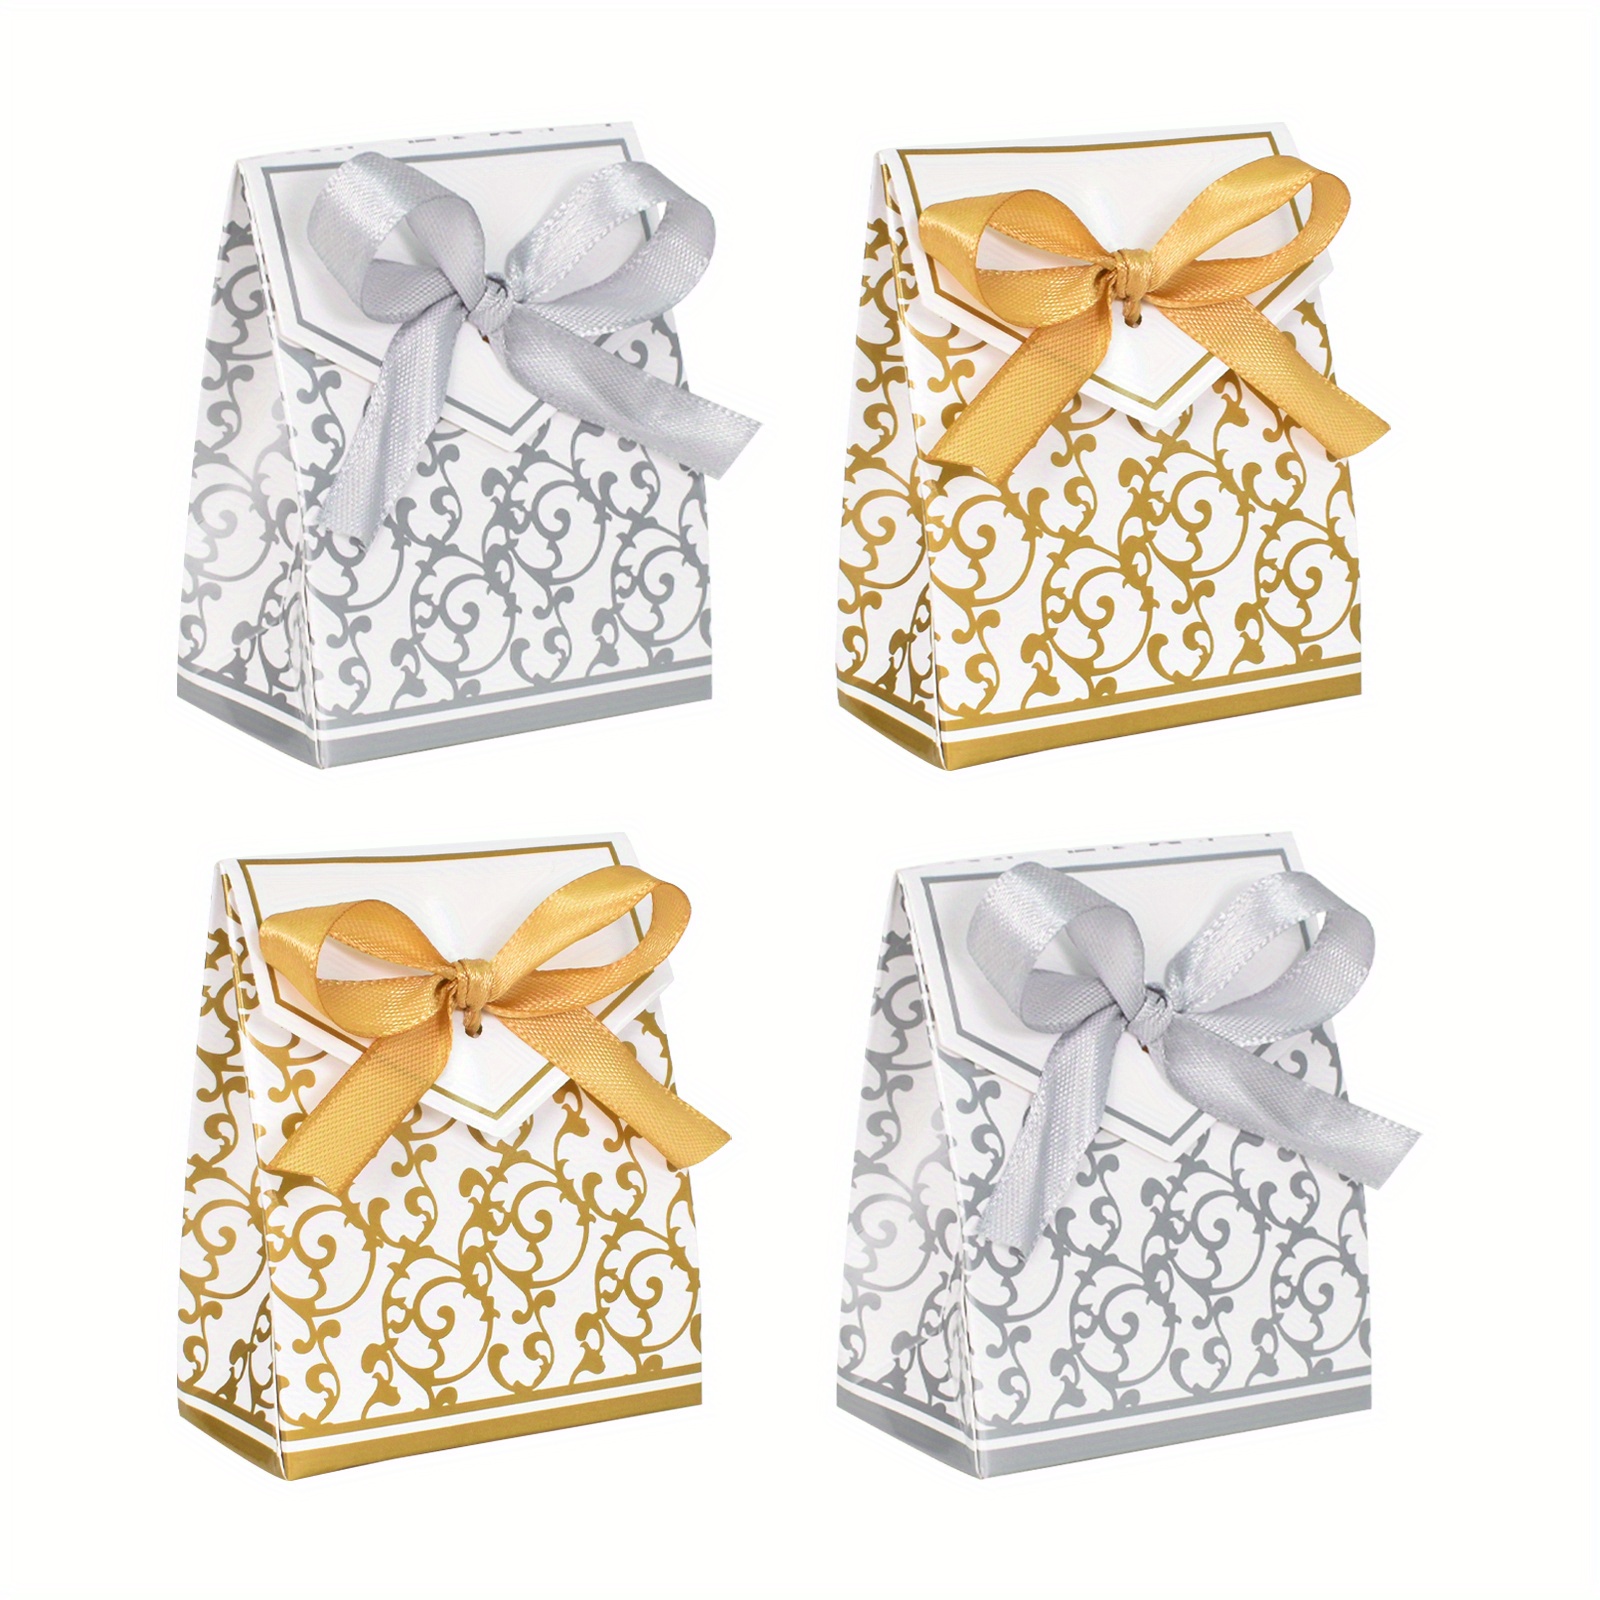 White Paper Mini Treat Bags, Treat Bags, Favor Bags, Favors, Paper Bags,  Kraft Paper Bags, Gift Bags, Gift Packaging, Wedding, Party 